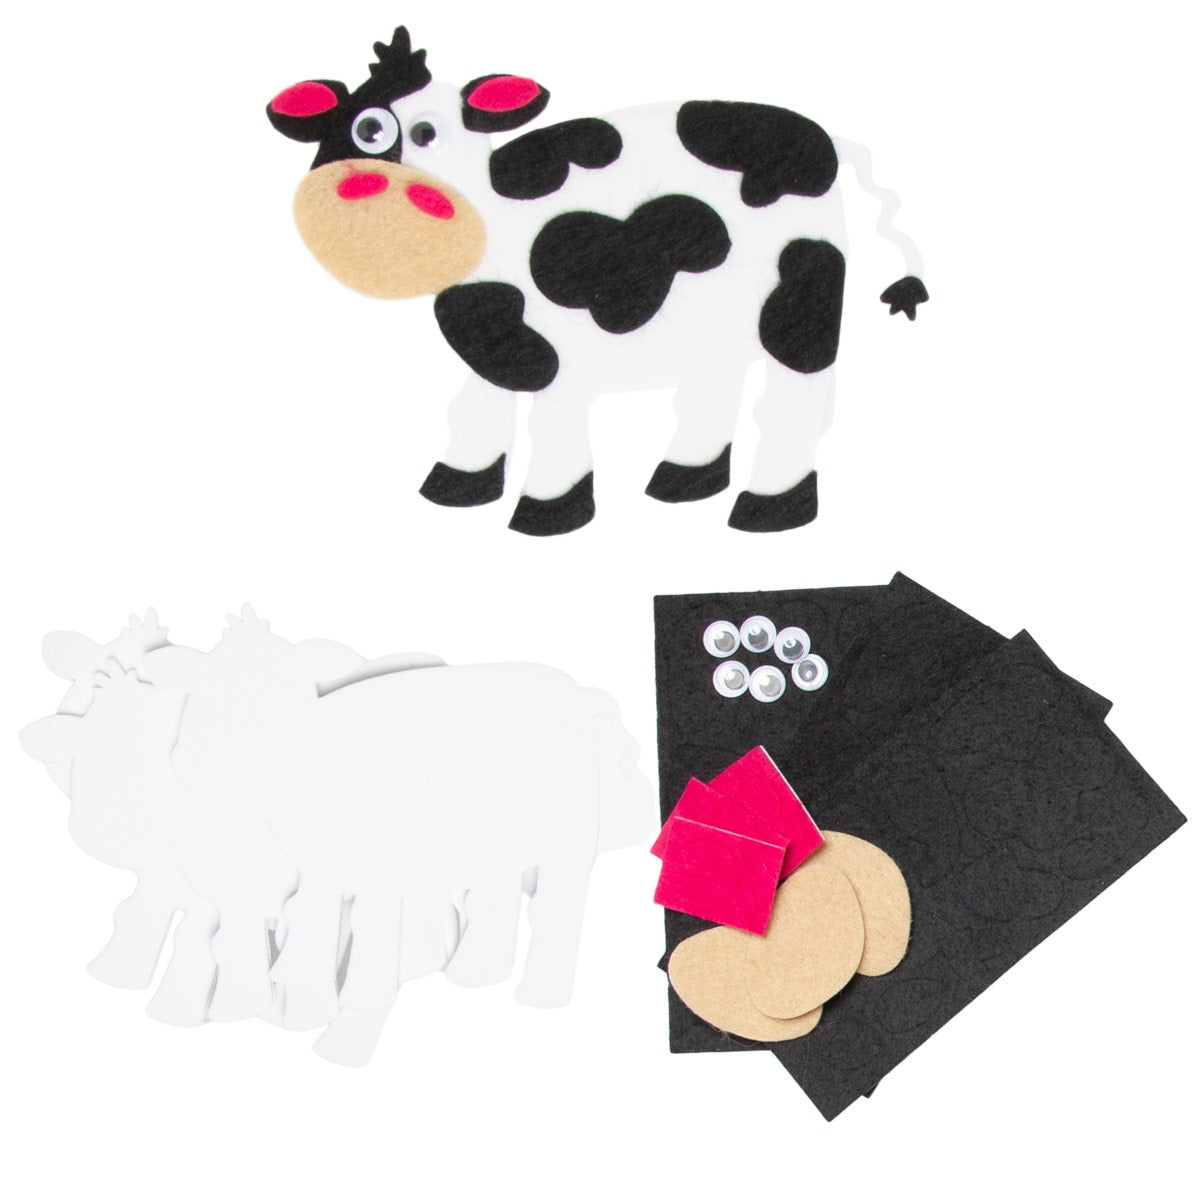 8pk Cow Foam Stickers with Googly Eyes - Makes 32 Cows Total!